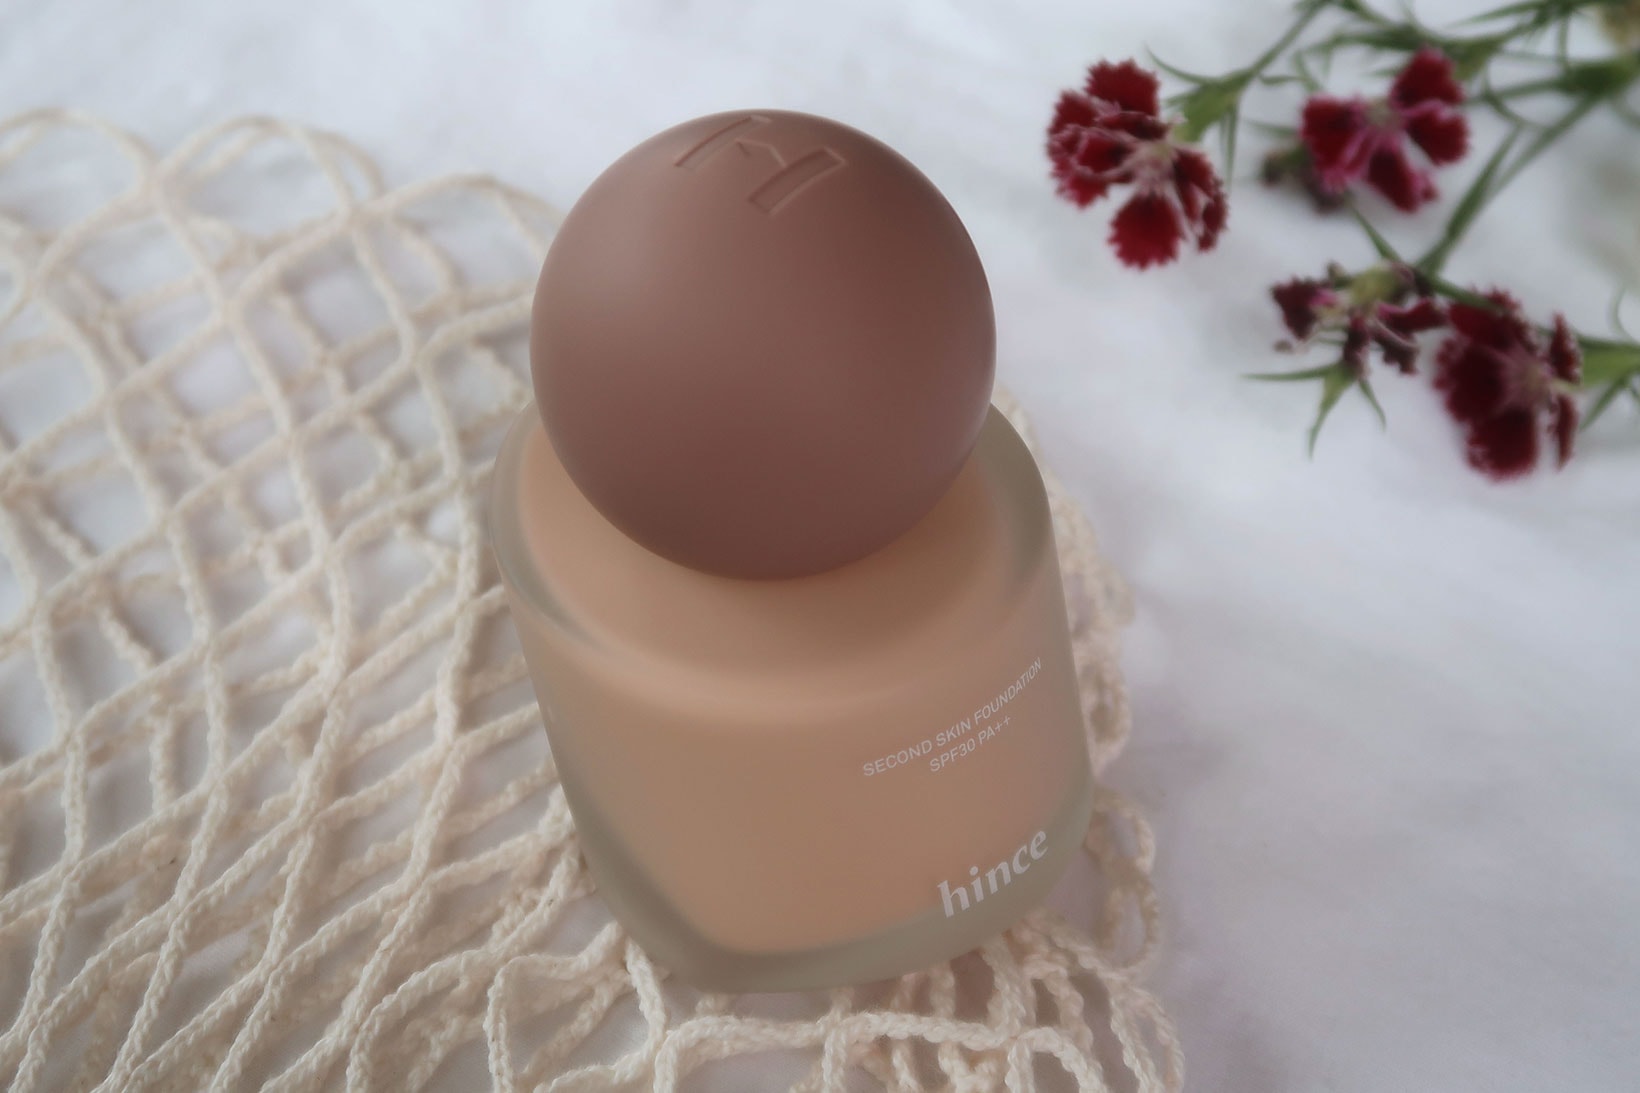 hince second skin foundation k-beauty makeup product bottle packaging flower